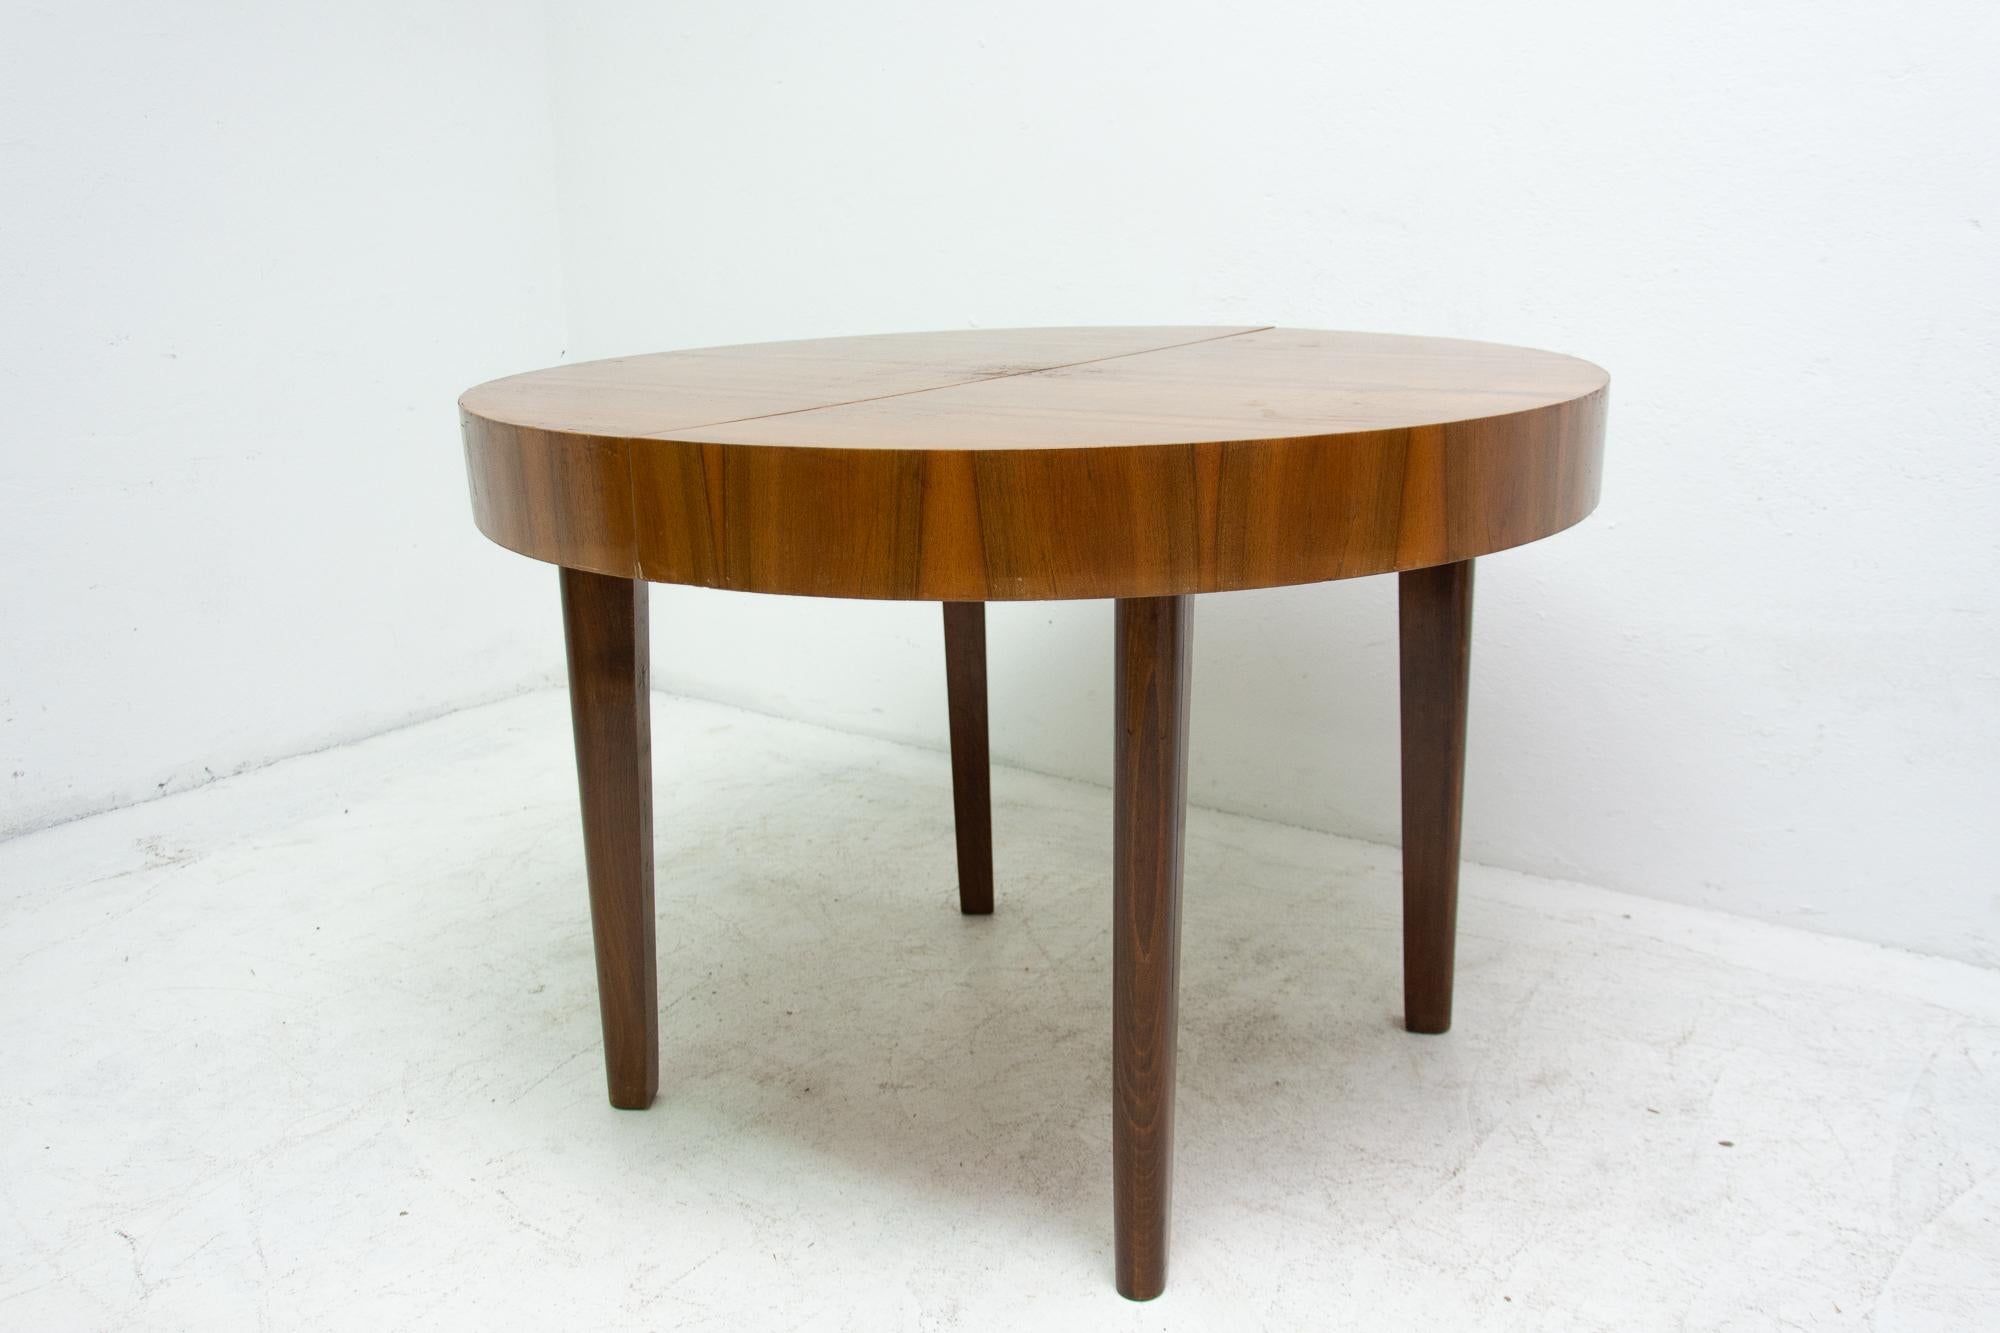 Midcentury Round Folding Dining Table in Walnut, Czechoslovakia, 1950s In Good Condition In Prague 8, CZ